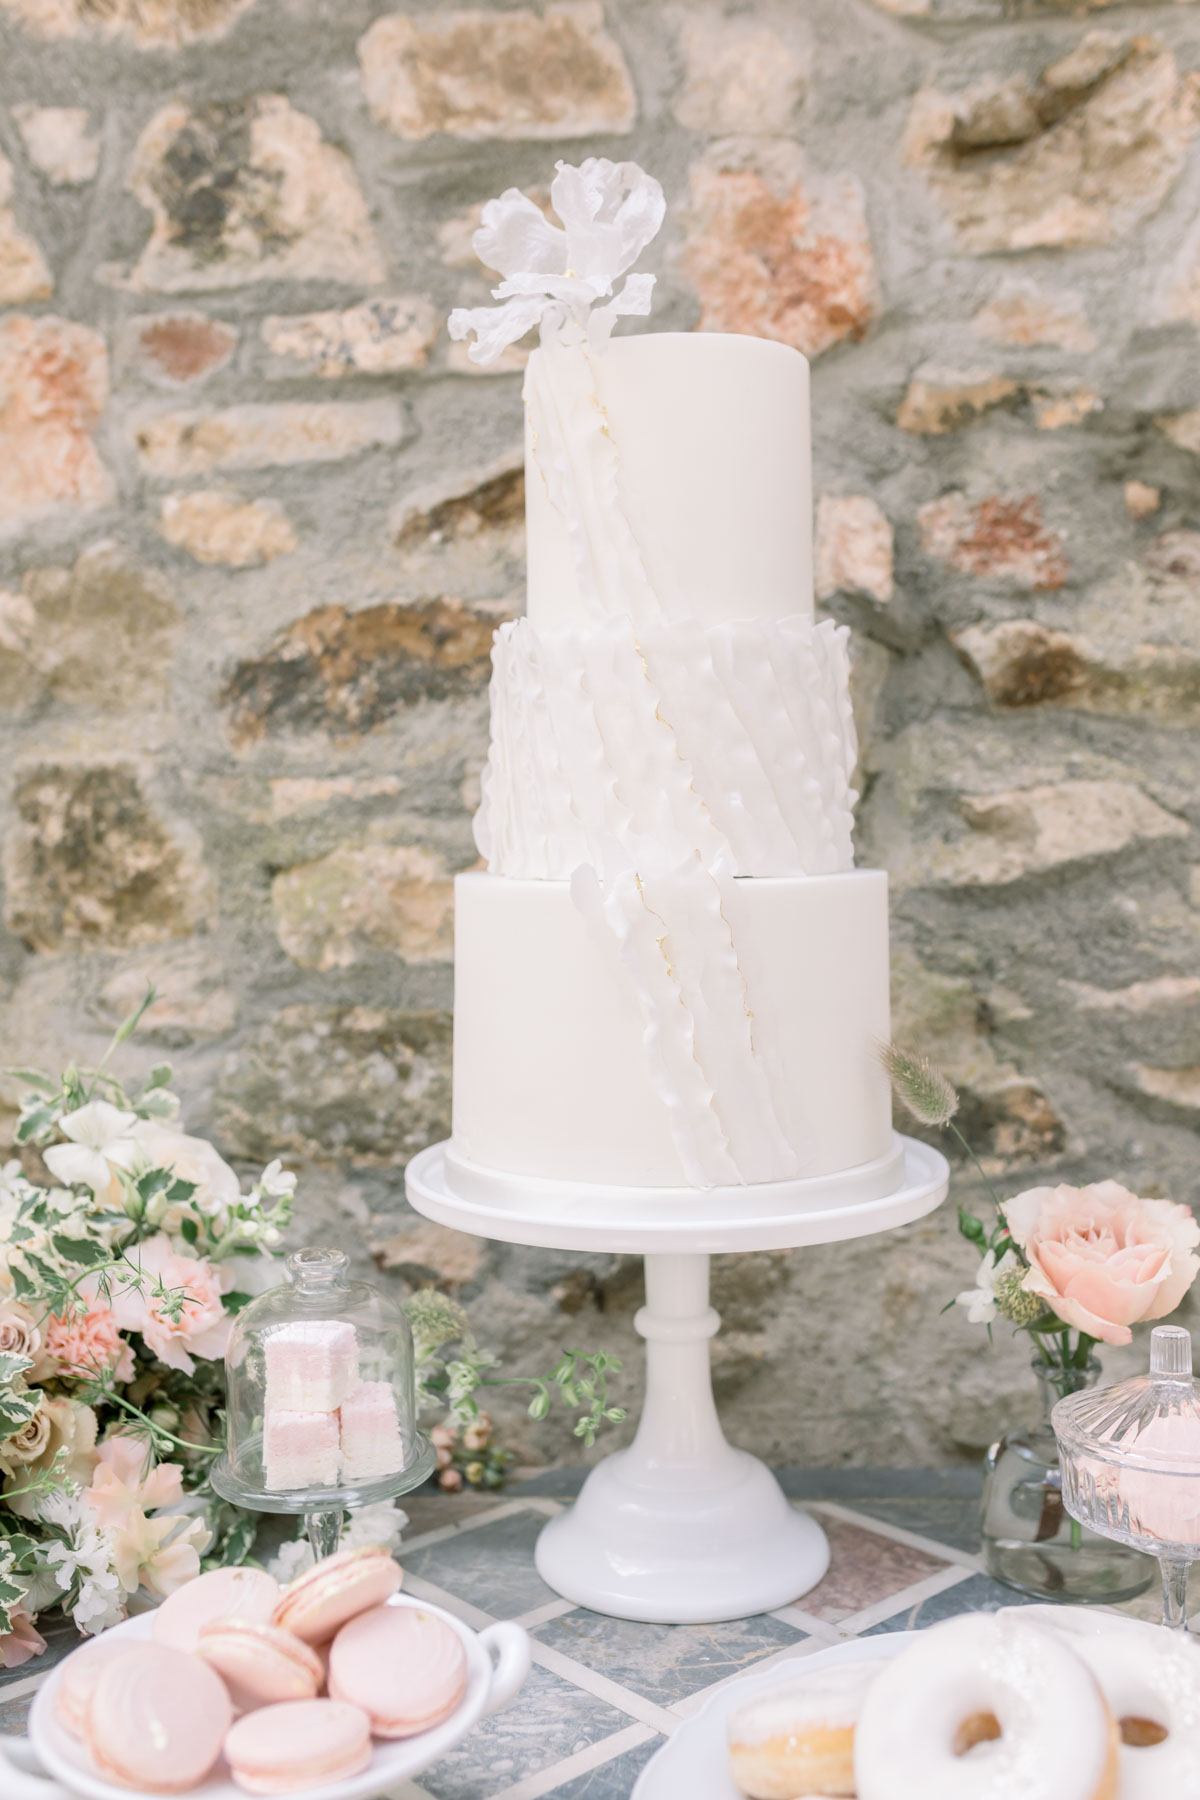 Enchant Your Wedding Guests With An Exquistie Wedding Just Like This One